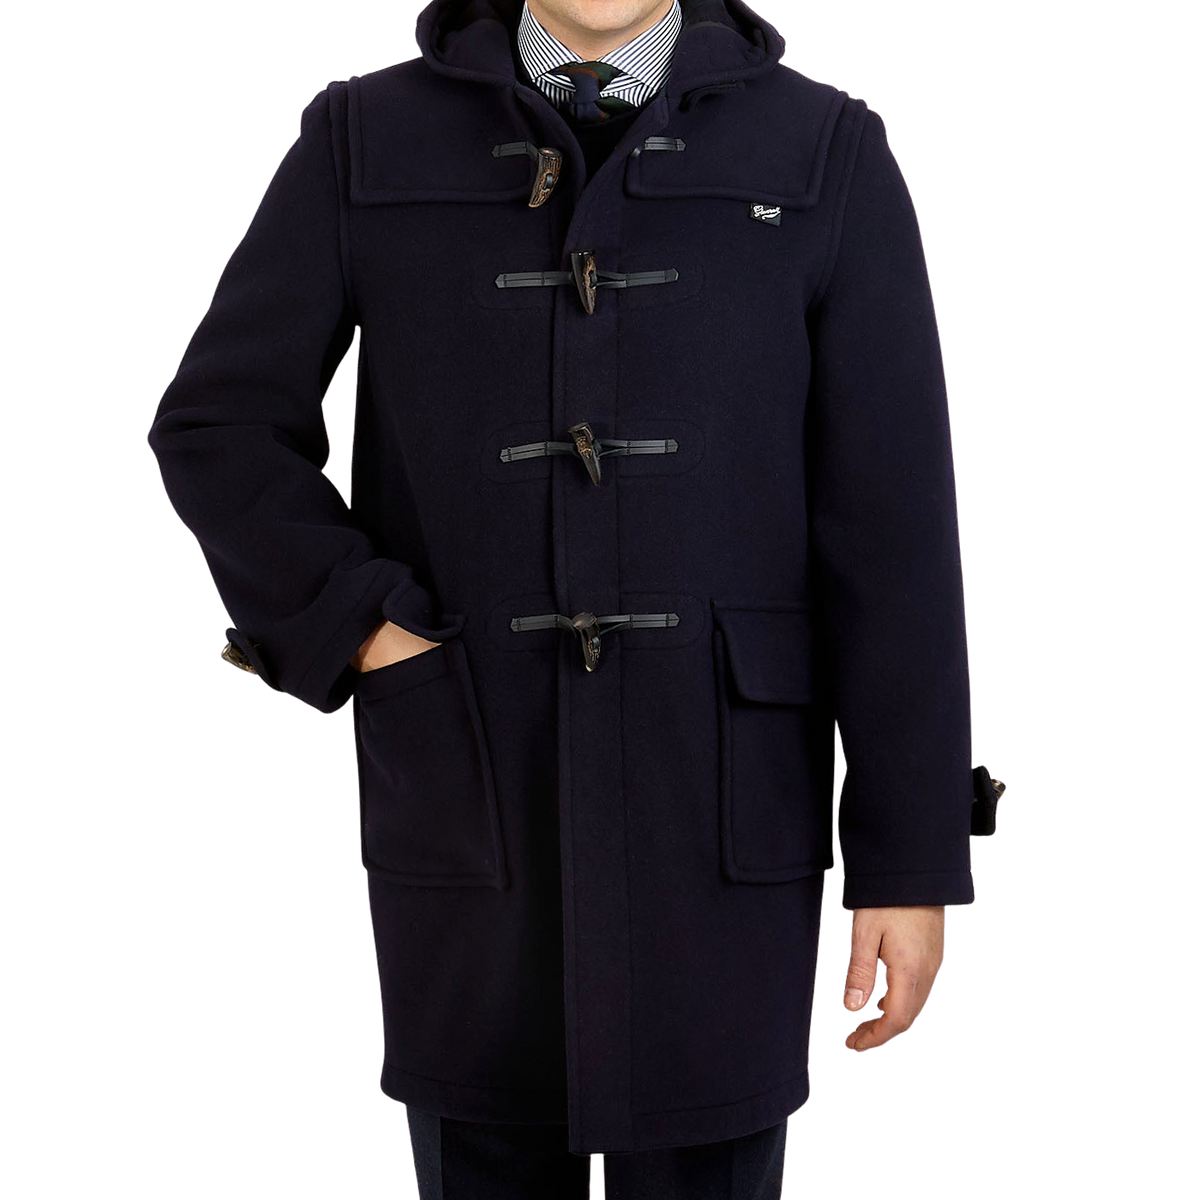 Gloverall Navy Blue Morris Duffle Coat Front